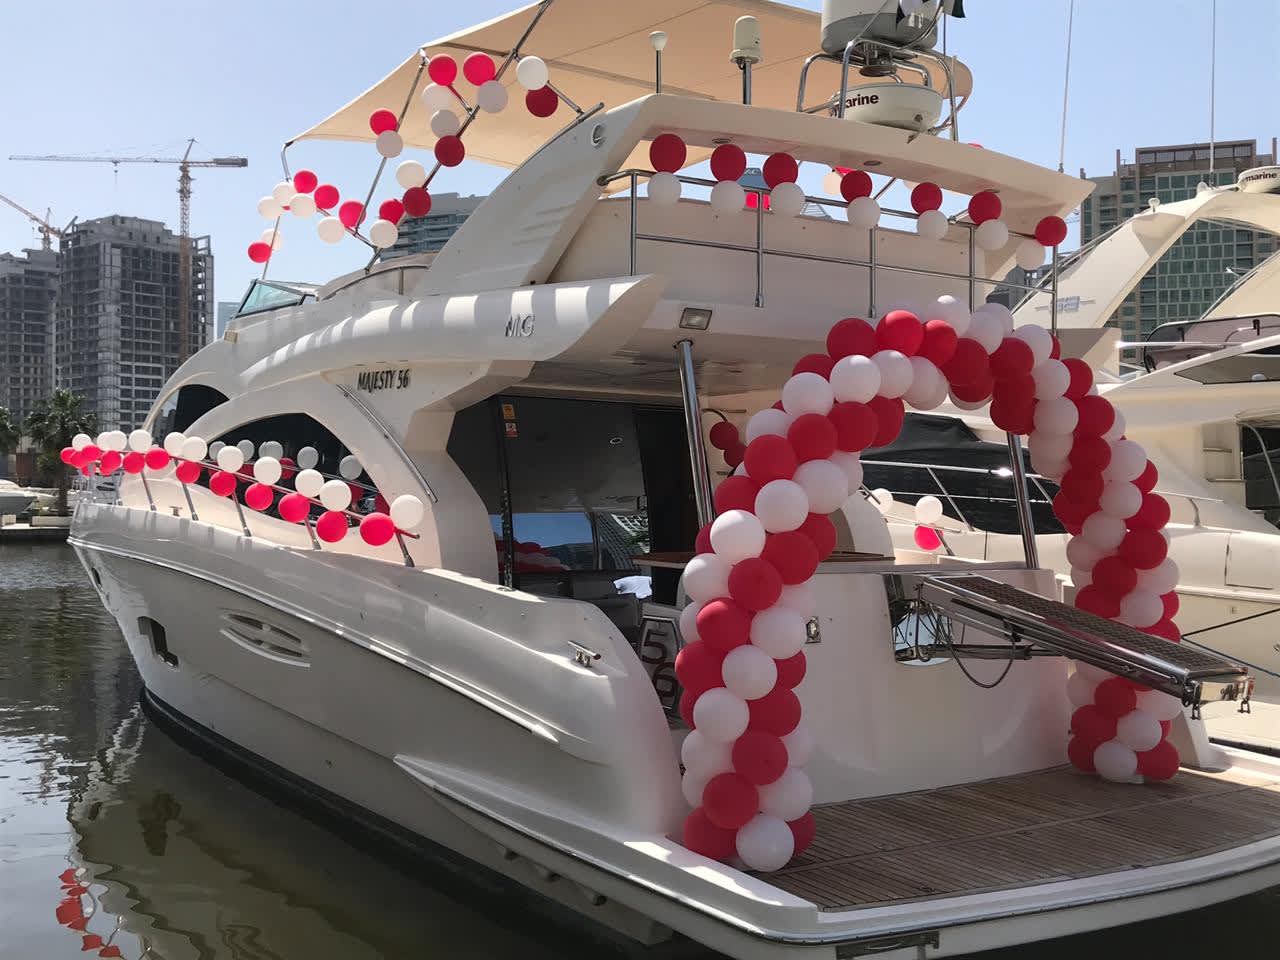 rental yachts for birthday parties in dubai